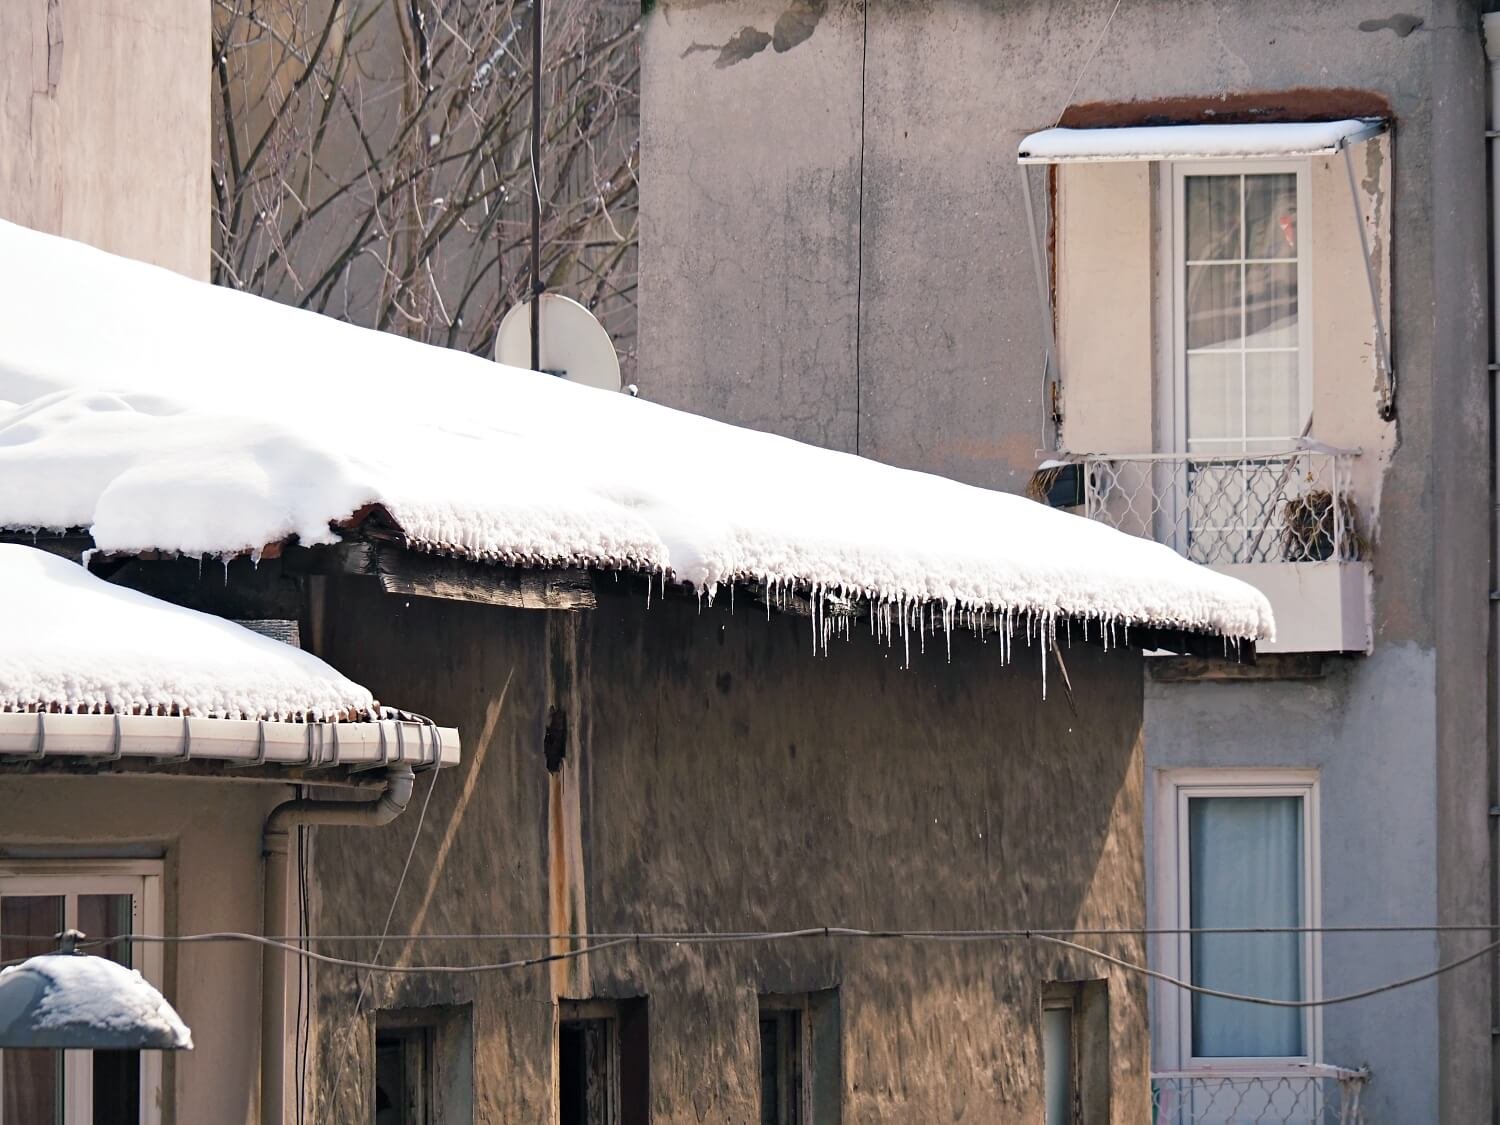 Snow and icicles on the roof of a house in Cihangir in Istanbul during winter